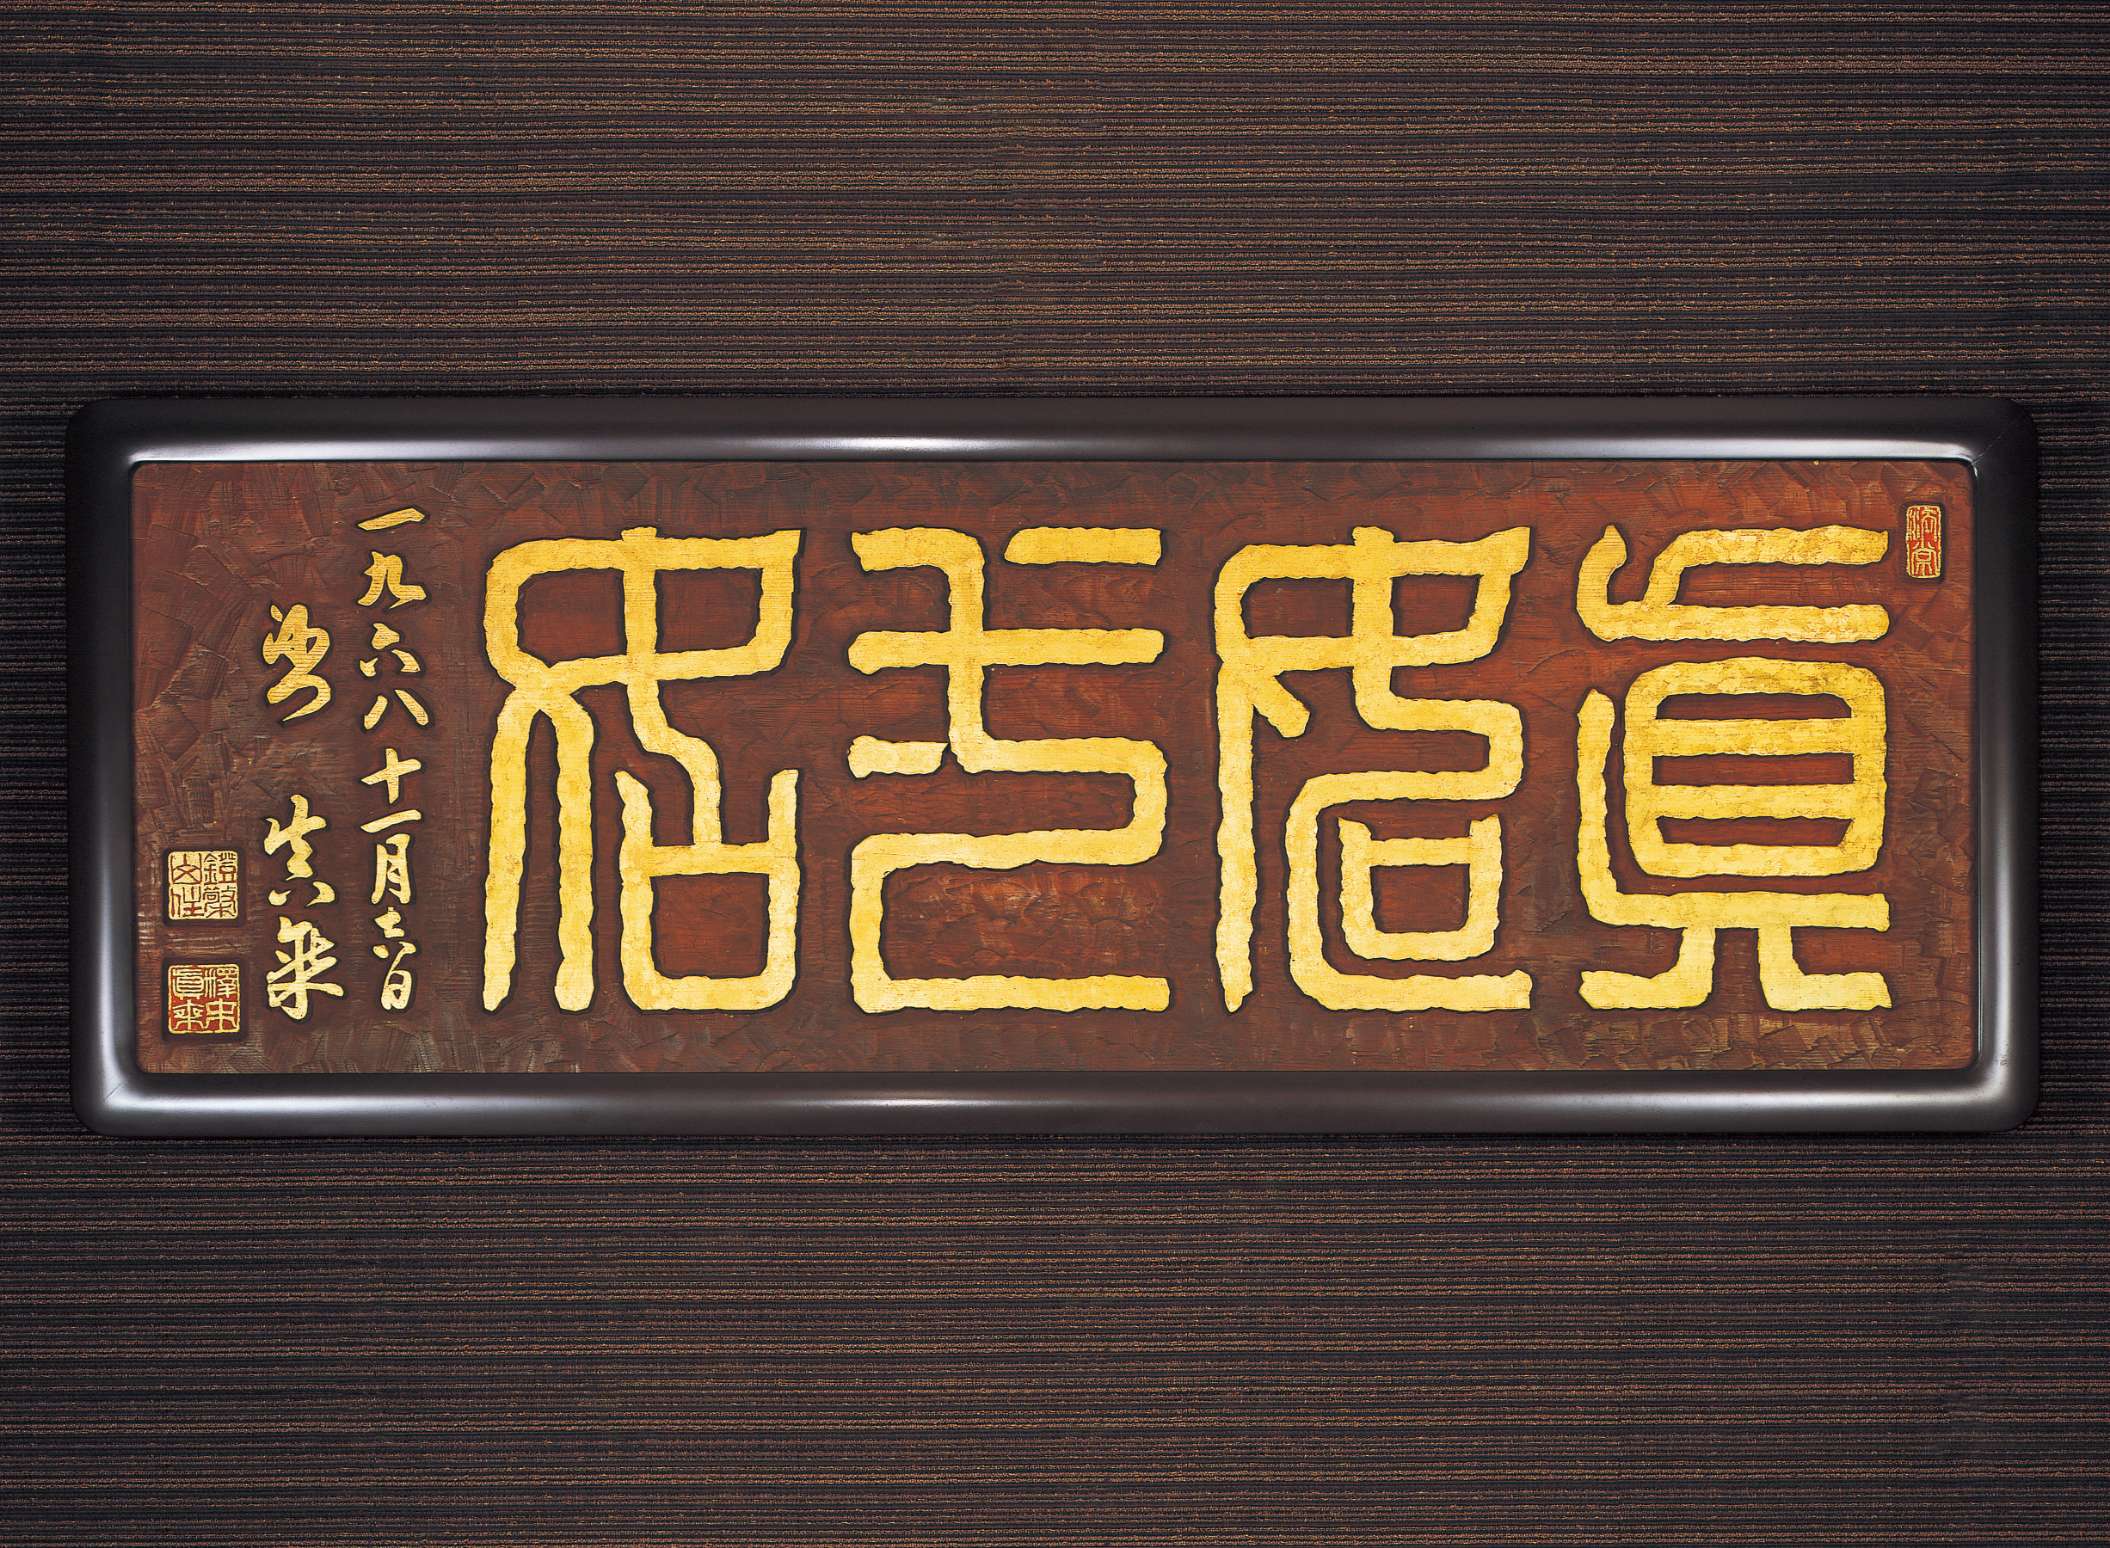 A long rectangular slab of umber wood is carved with stylized thick lined, golden kanji characters that nearly fill the space, with small, vertical Japanese calligraphy in gold and red and gold seals.